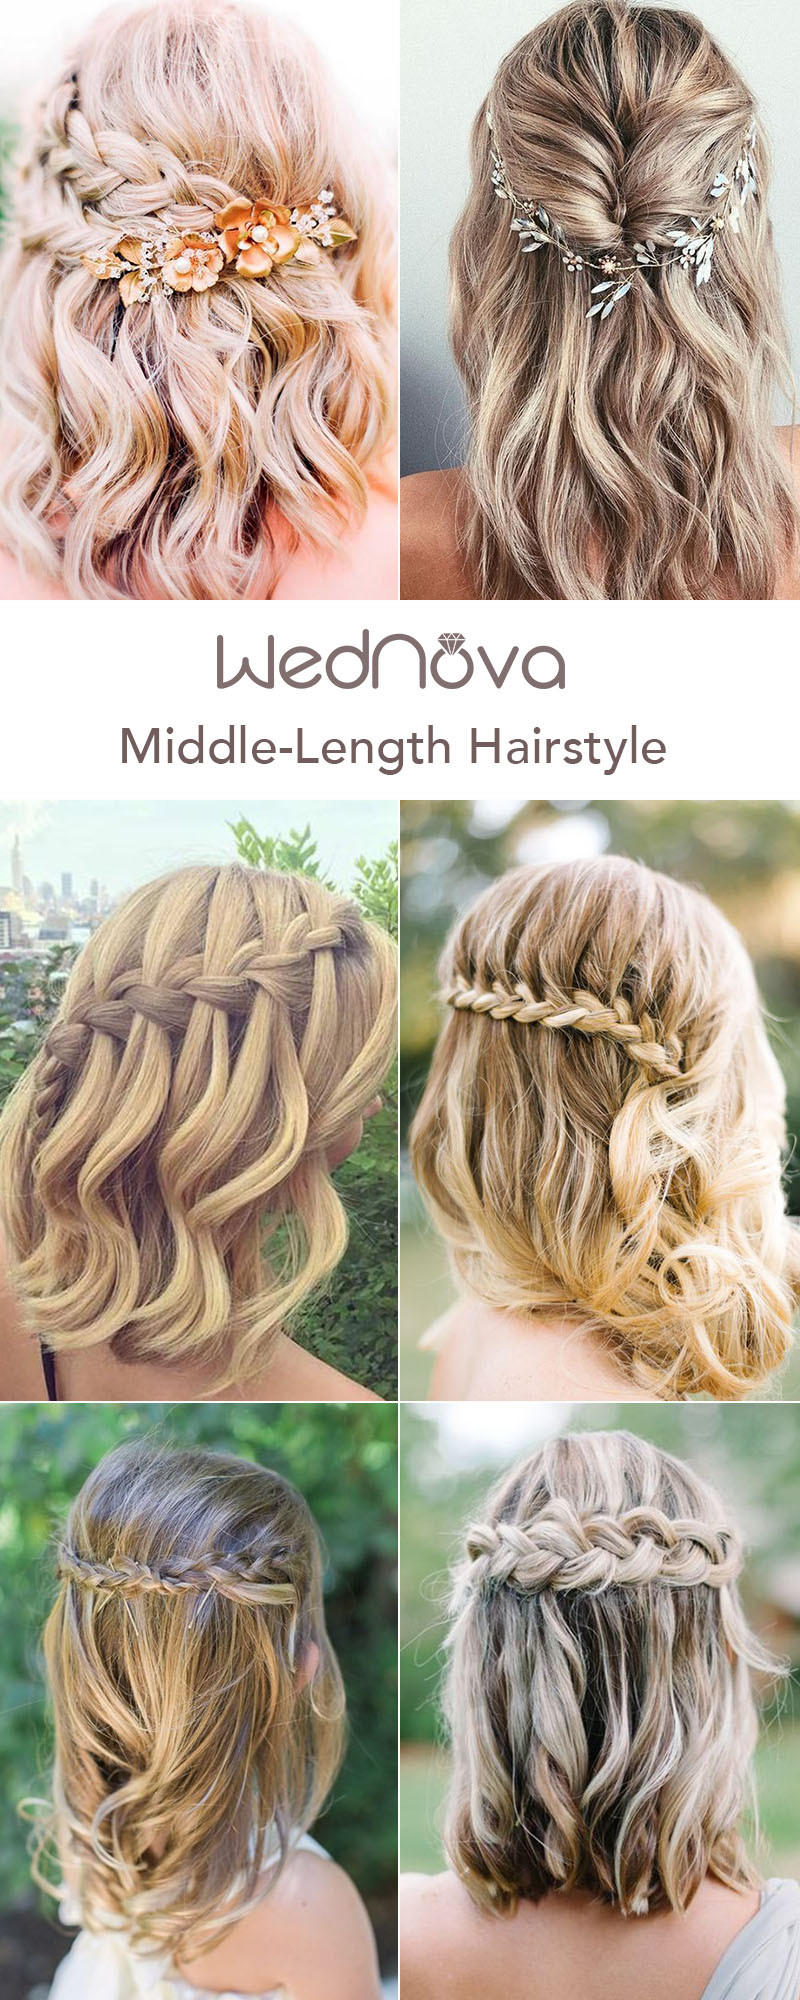 Shoulder Length Bridesmaid Hairstyles
 48 Easy Wedding Hairstyles Best Guide for Your Bridesmaids